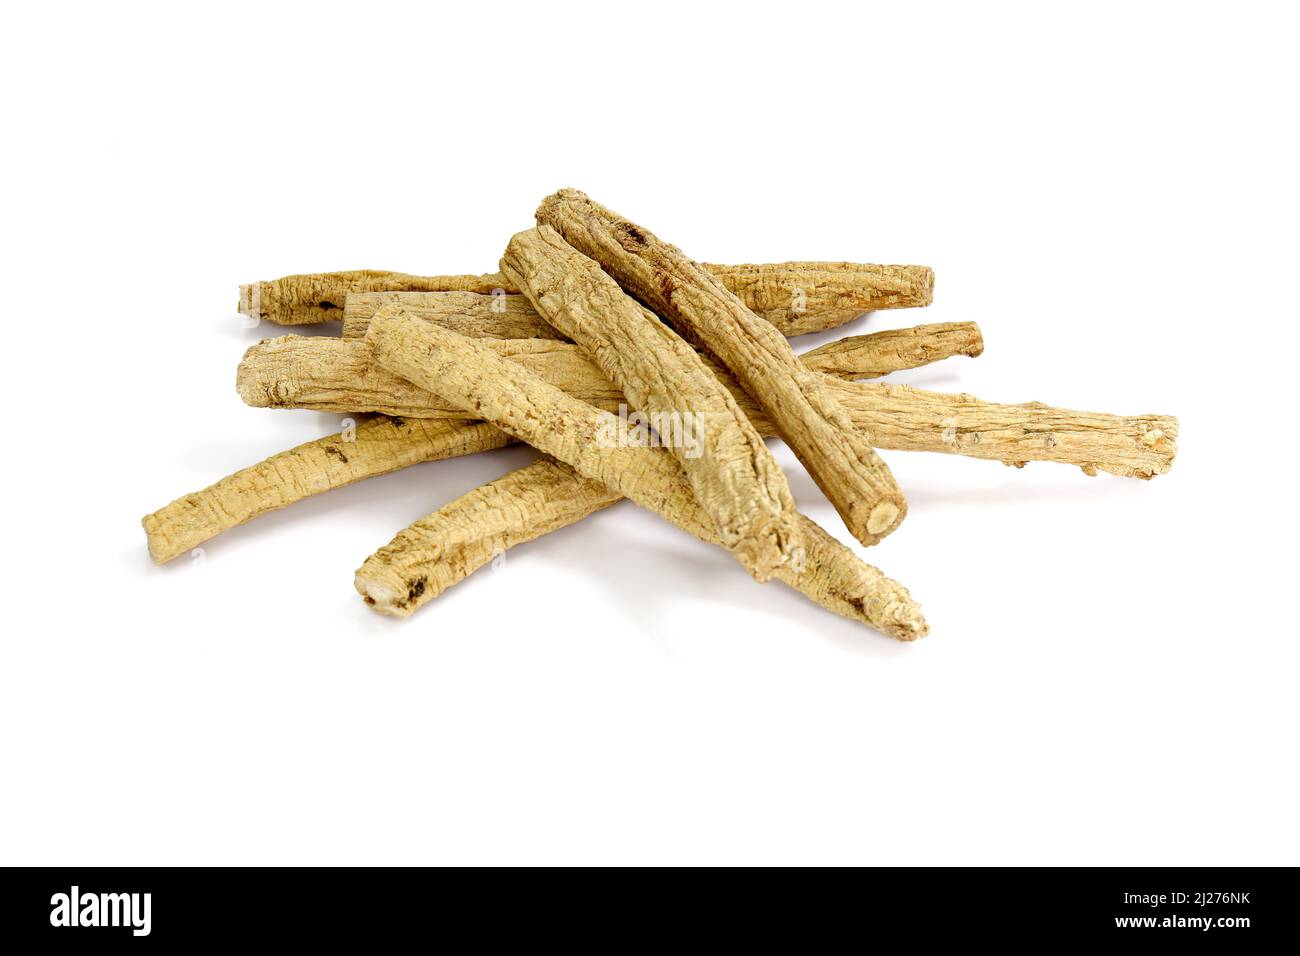 Chinese Herbal medicine - Dang  Shen or poor man's ginseng (Codonopsis pilosula) on white background Stock Photo